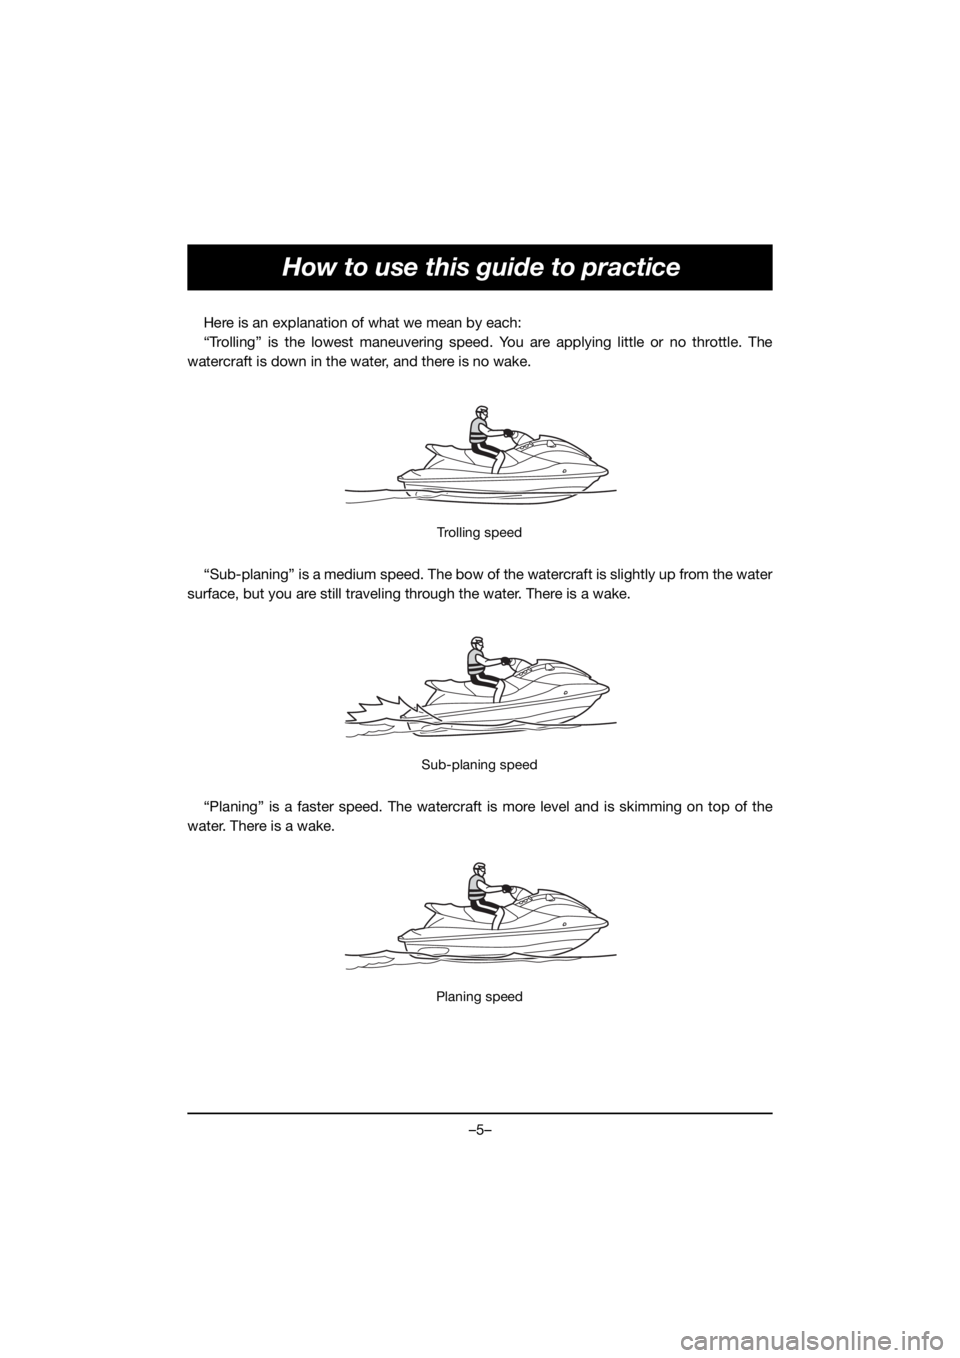 YAMAHA VX CRUISER HO 2021  Owners Manual –5–
How to use this guide to practice
Here is an explanation of what we mean by each:
“Trolling” is the lowest maneuvering speed. You are applying little or no throttle. The
watercraft is down